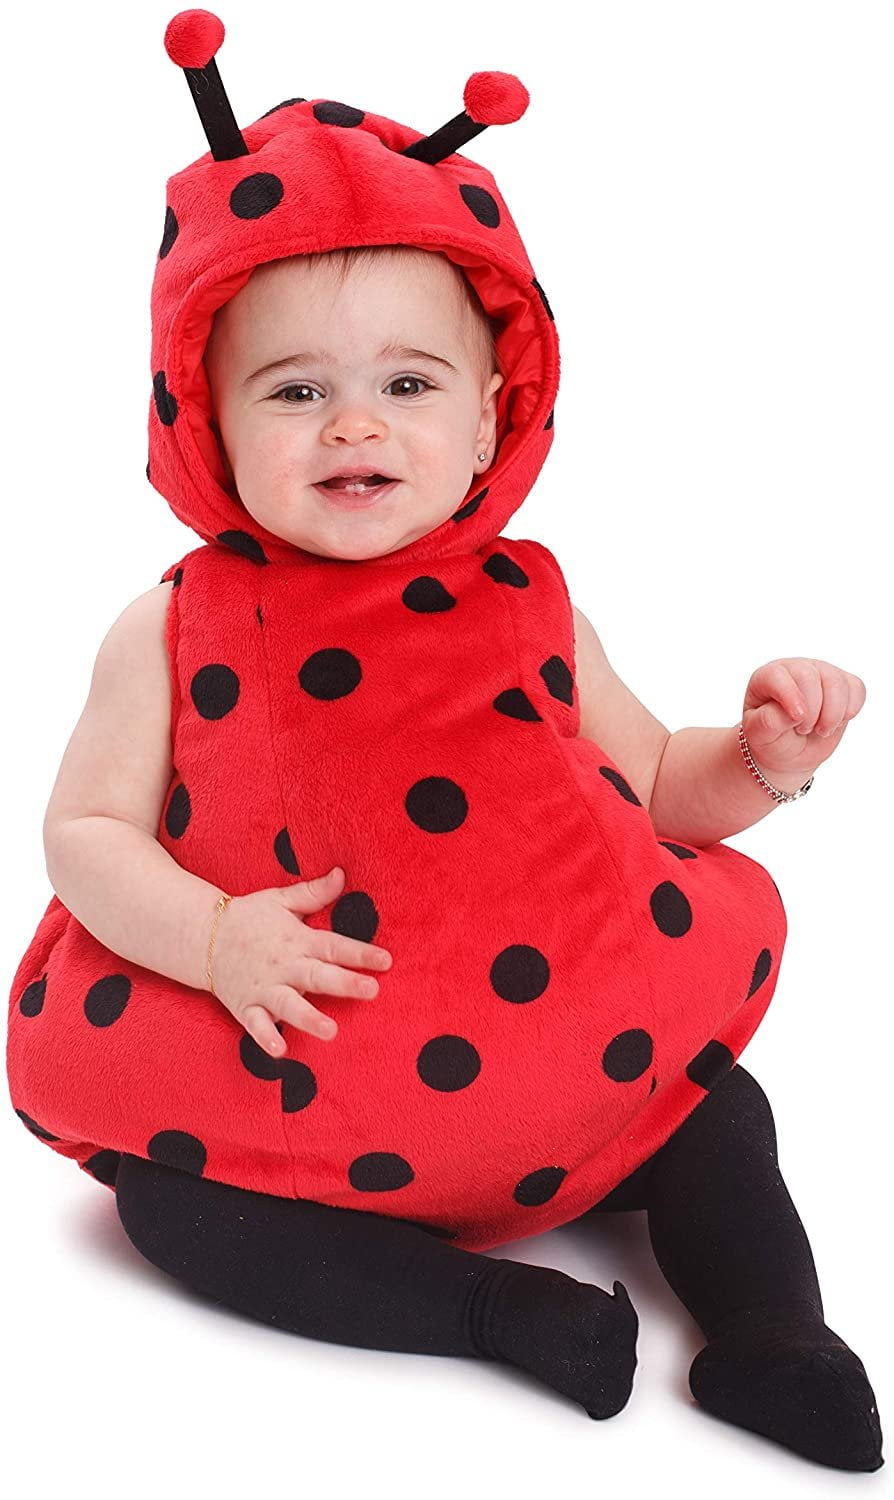 18" Build-a-b Lady Bug Dress w/Antenna Teddy Bear Clothes Outfit Fits Most 14" 